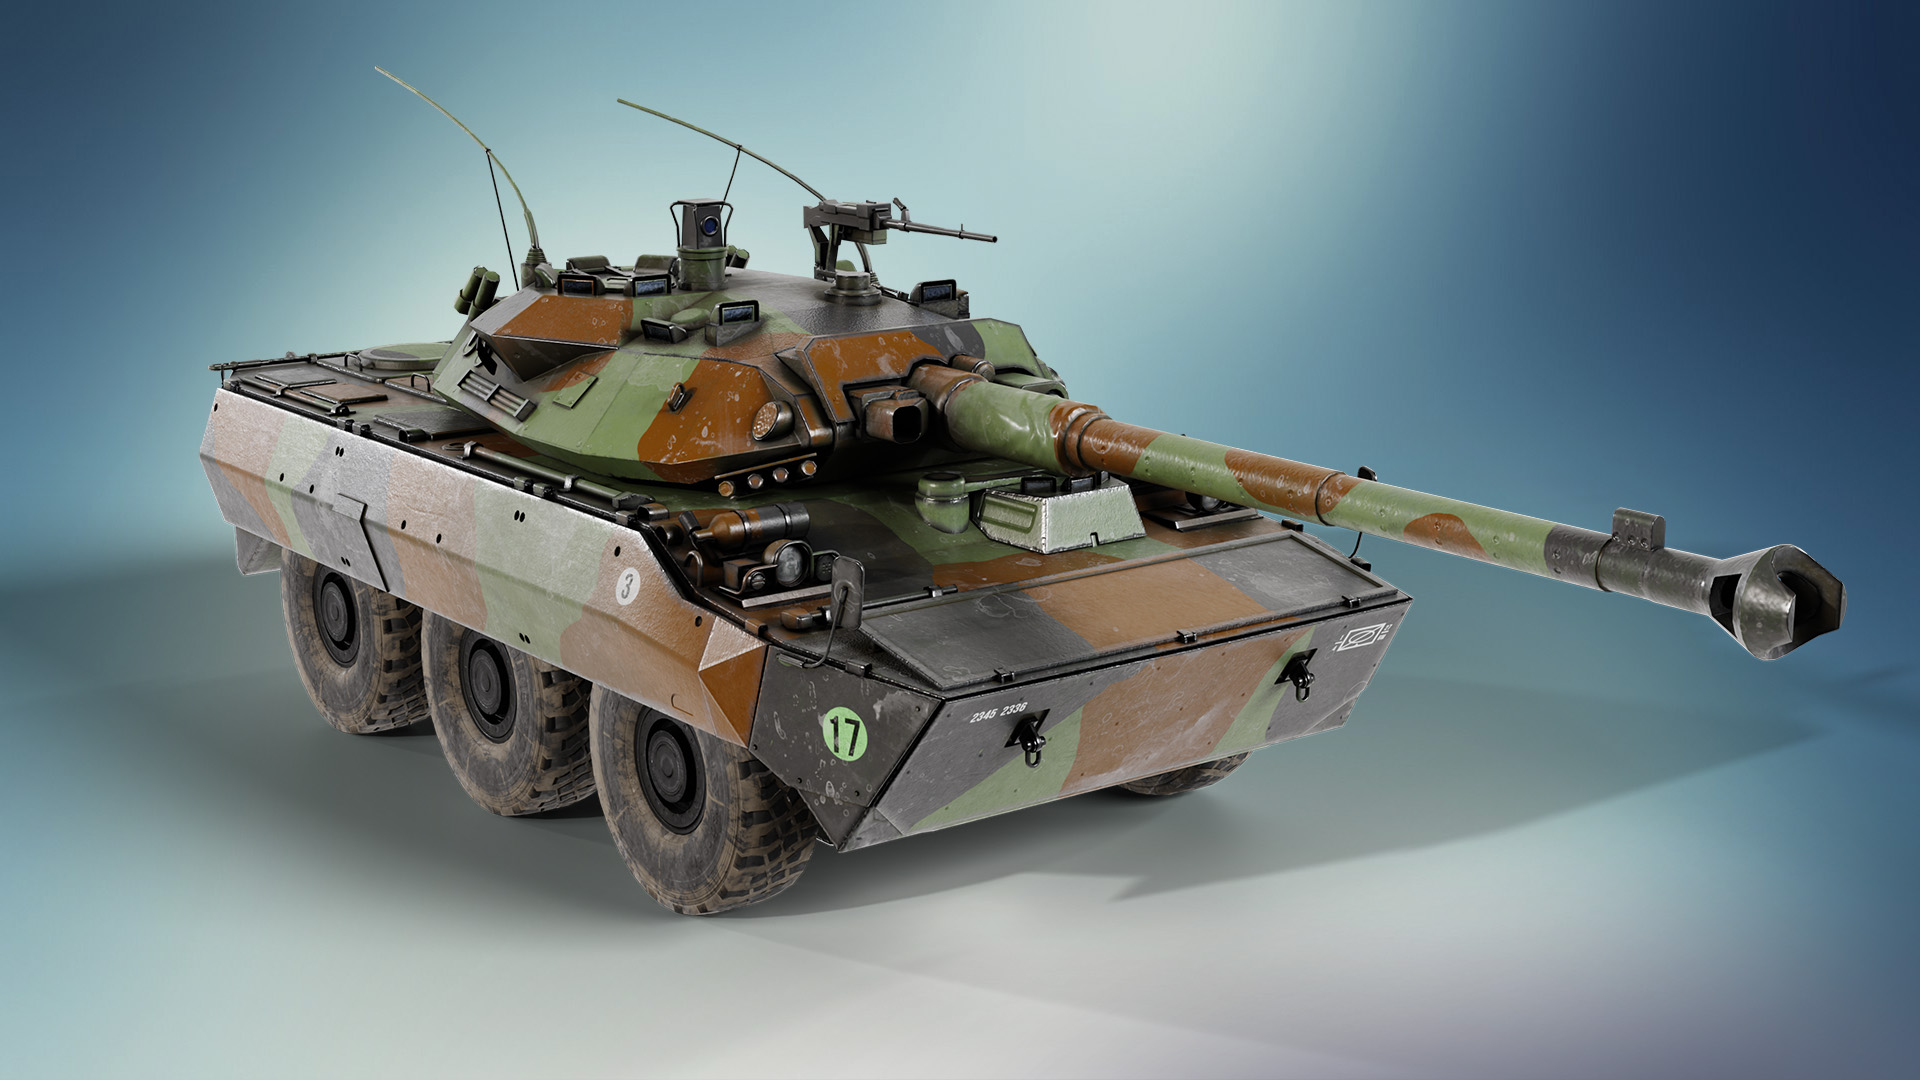 3D model of an leopard 2A6 in german army camo